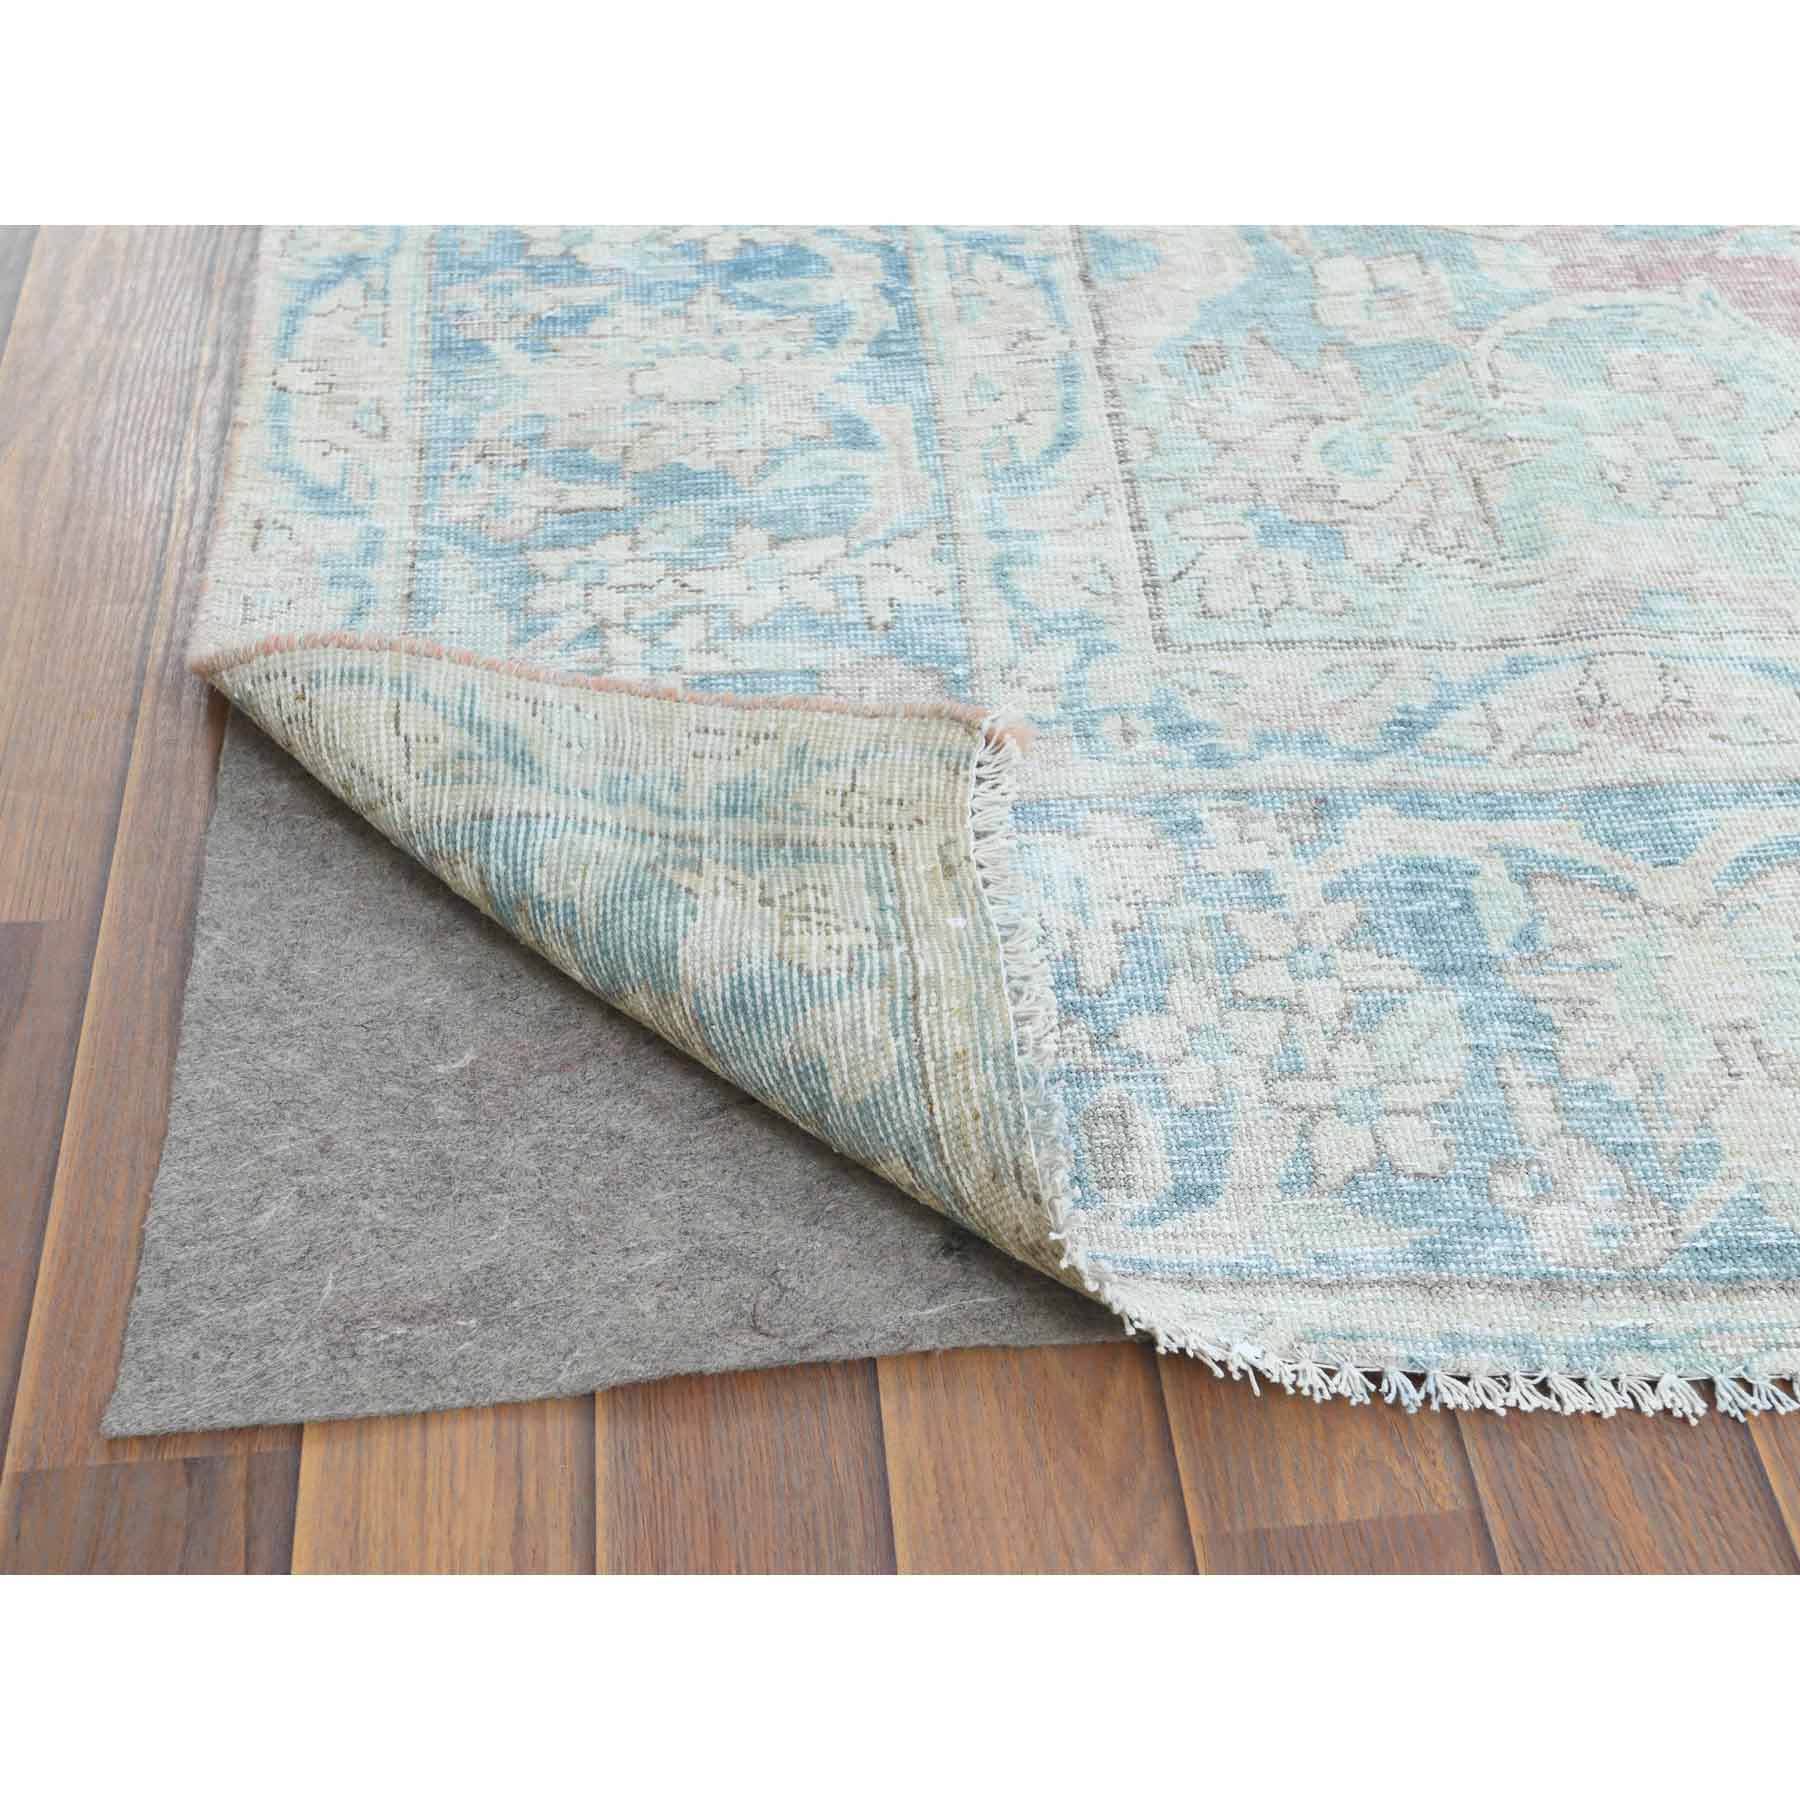 Overdyed-Vintage-Hand-Knotted-Rug-308535